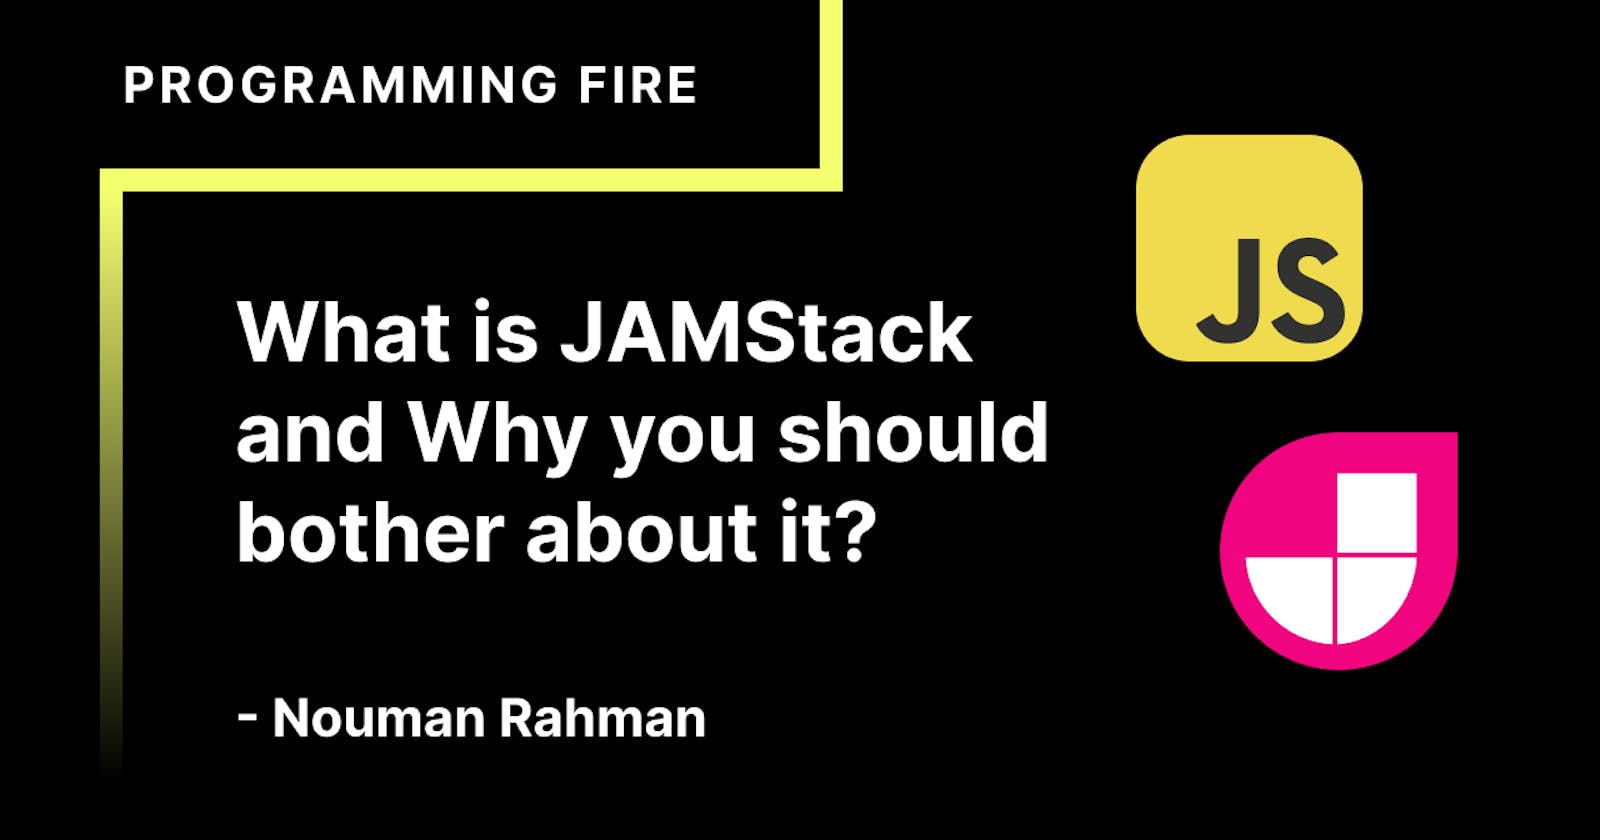 What is JAMstack, and Why Should You Bother About It?